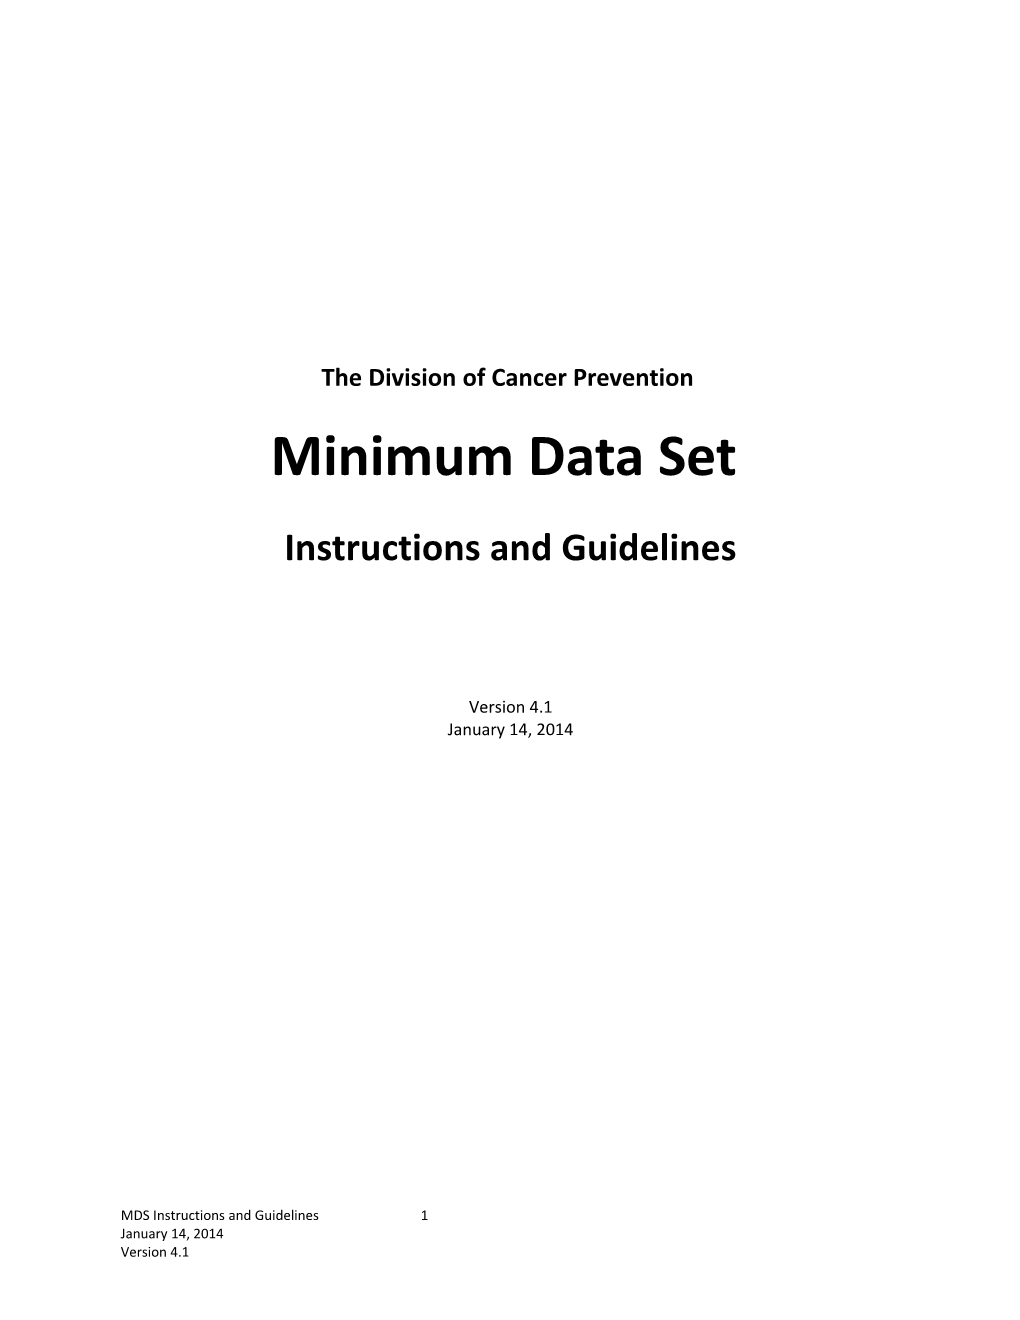 DCP Minimum Data Set Instructions and Guidelines